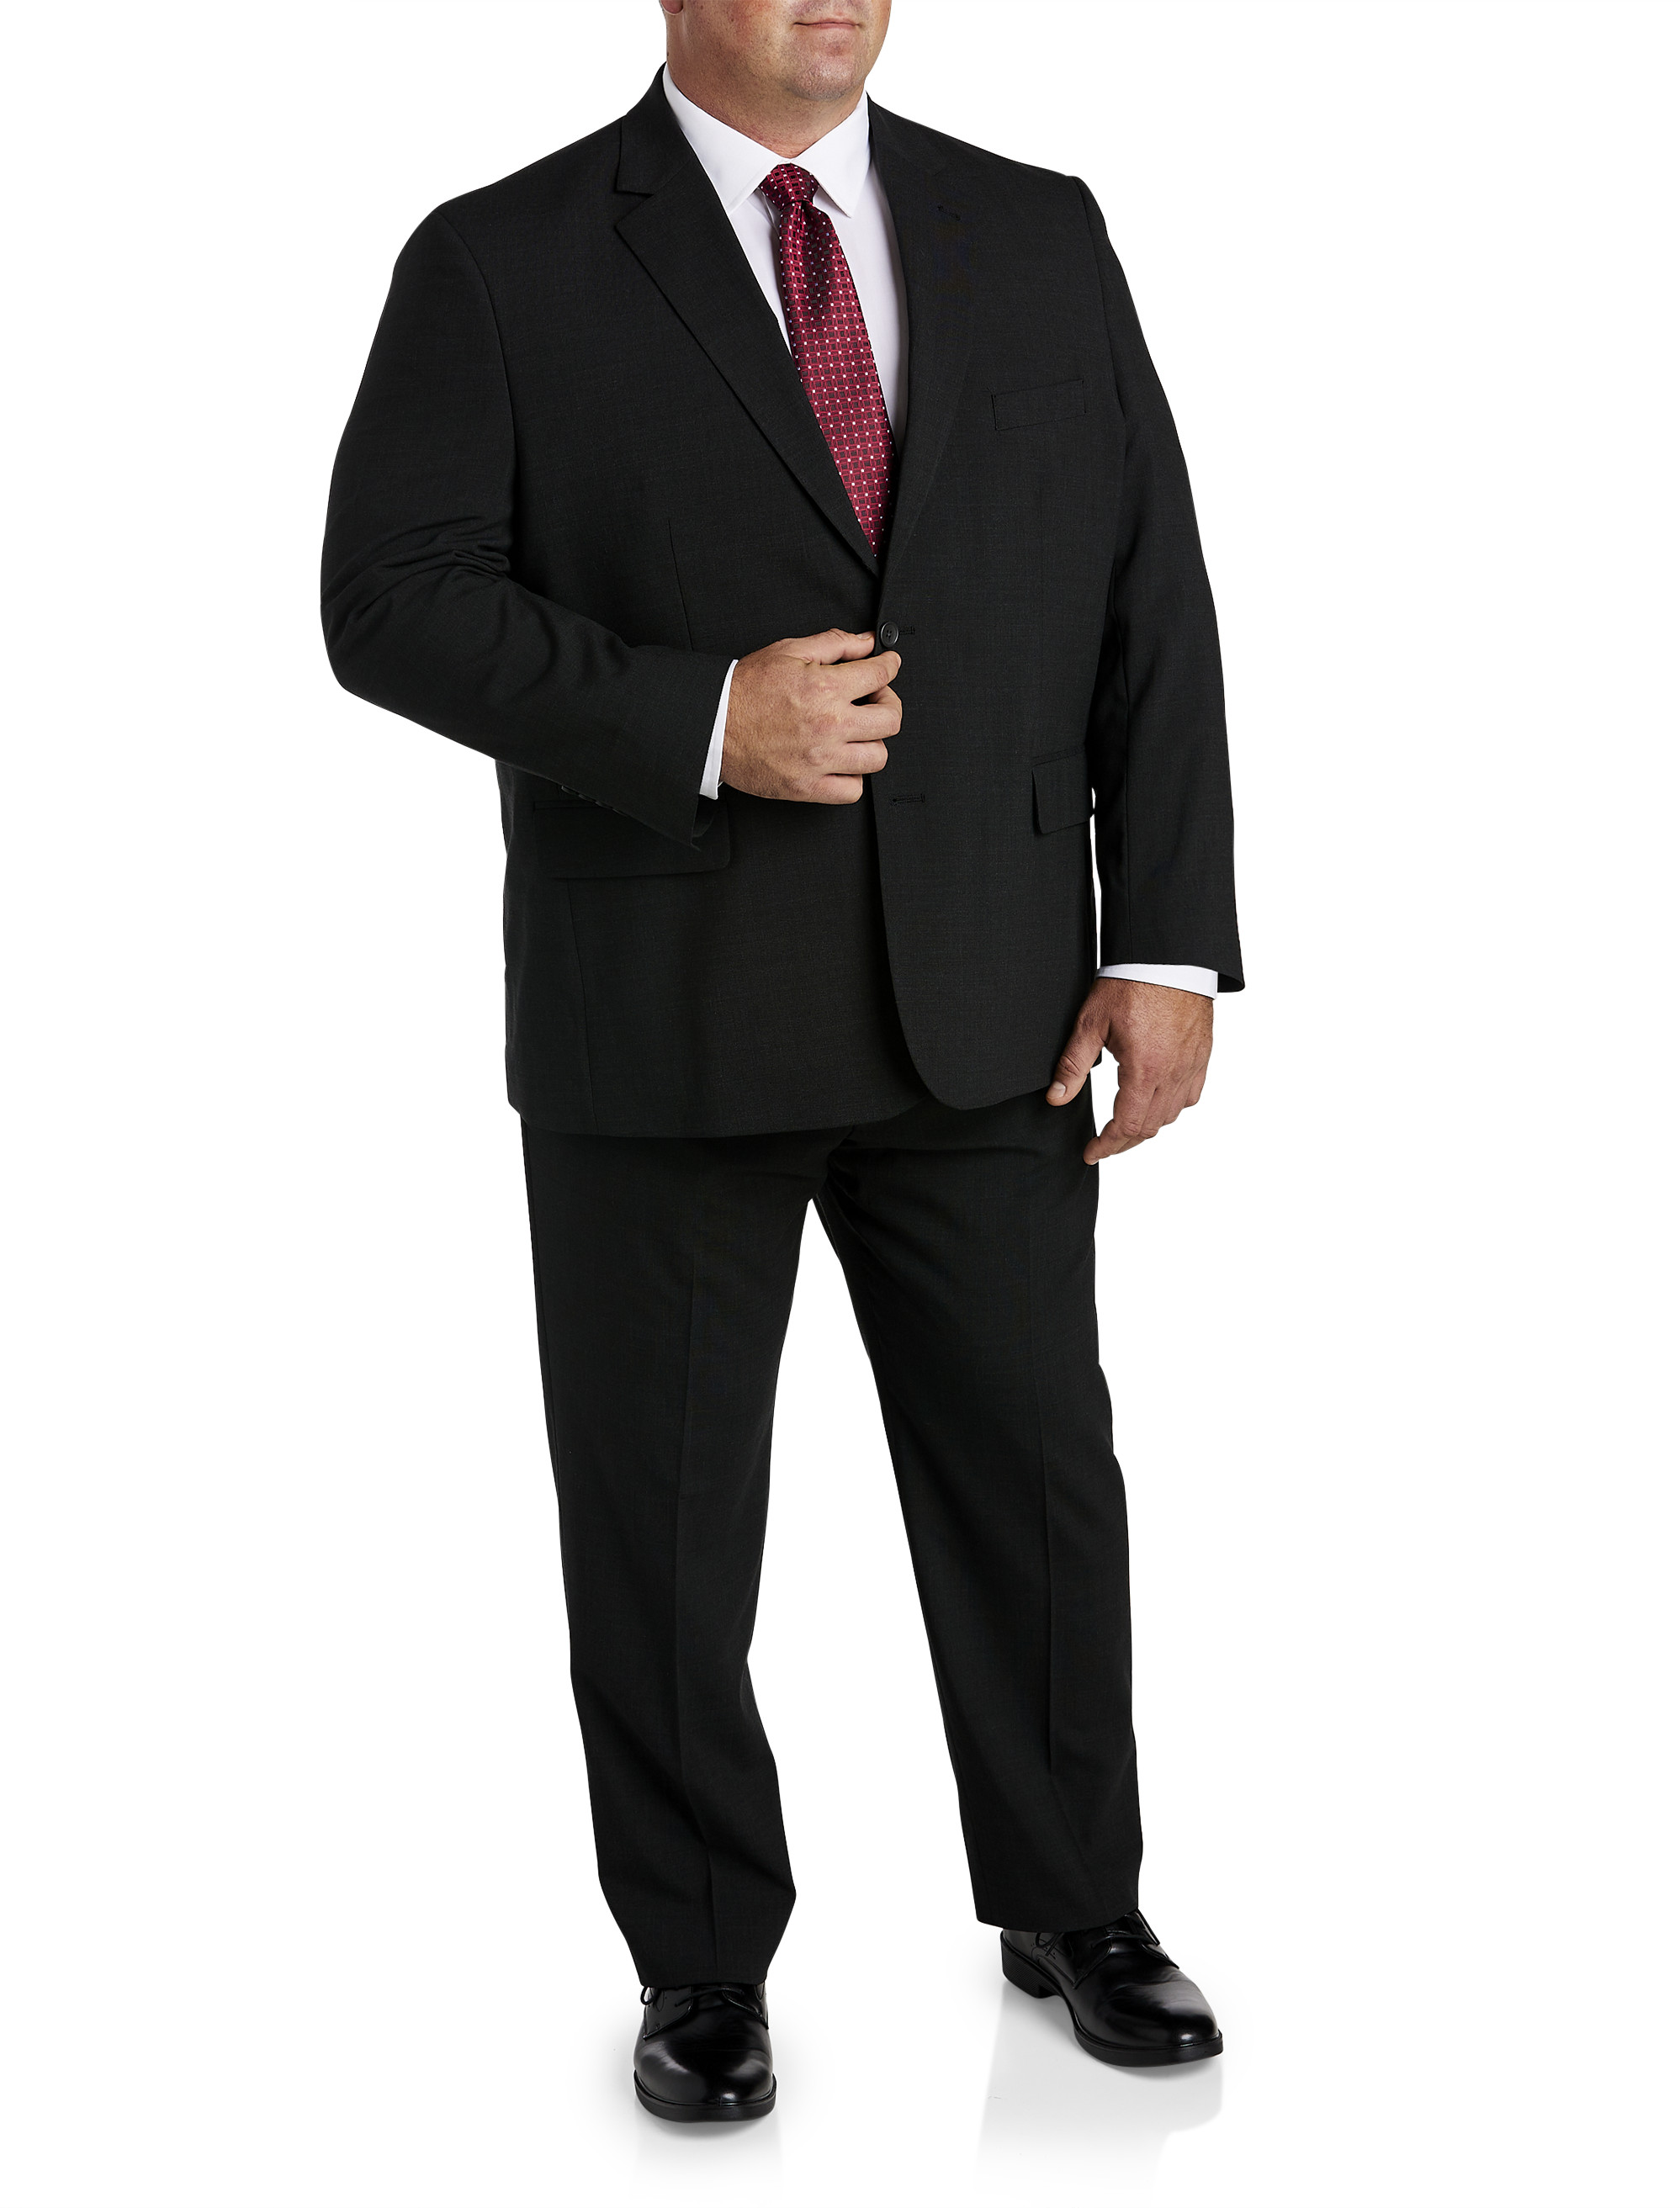 Mens Plus Size Suits, Big and Tall Suits